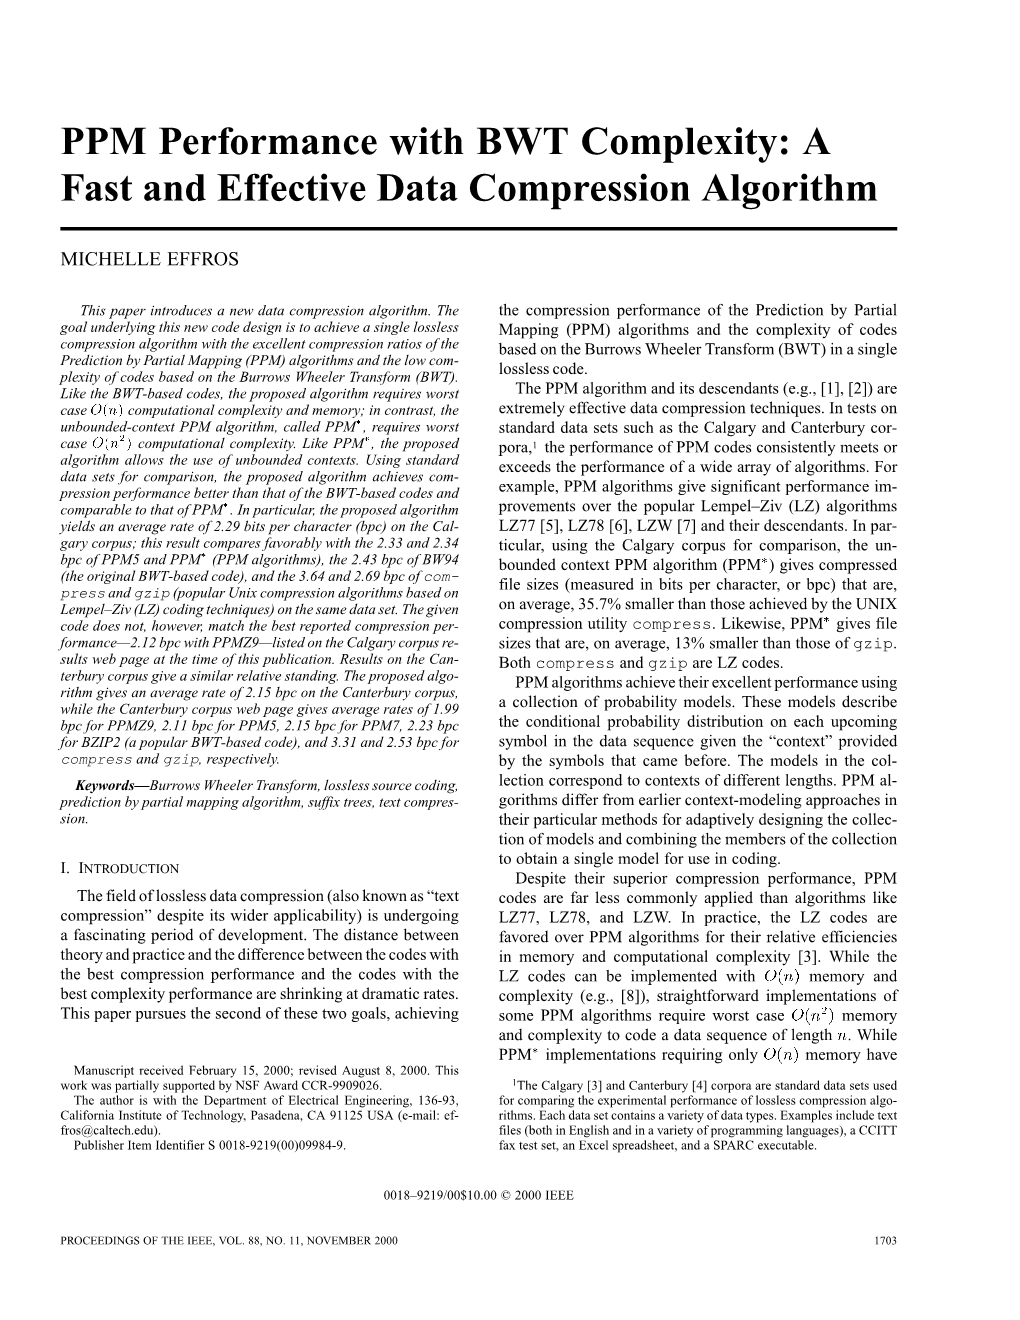 PPM Performance with BWT Complexity: a Fast and Effective Data Compression Algorithm